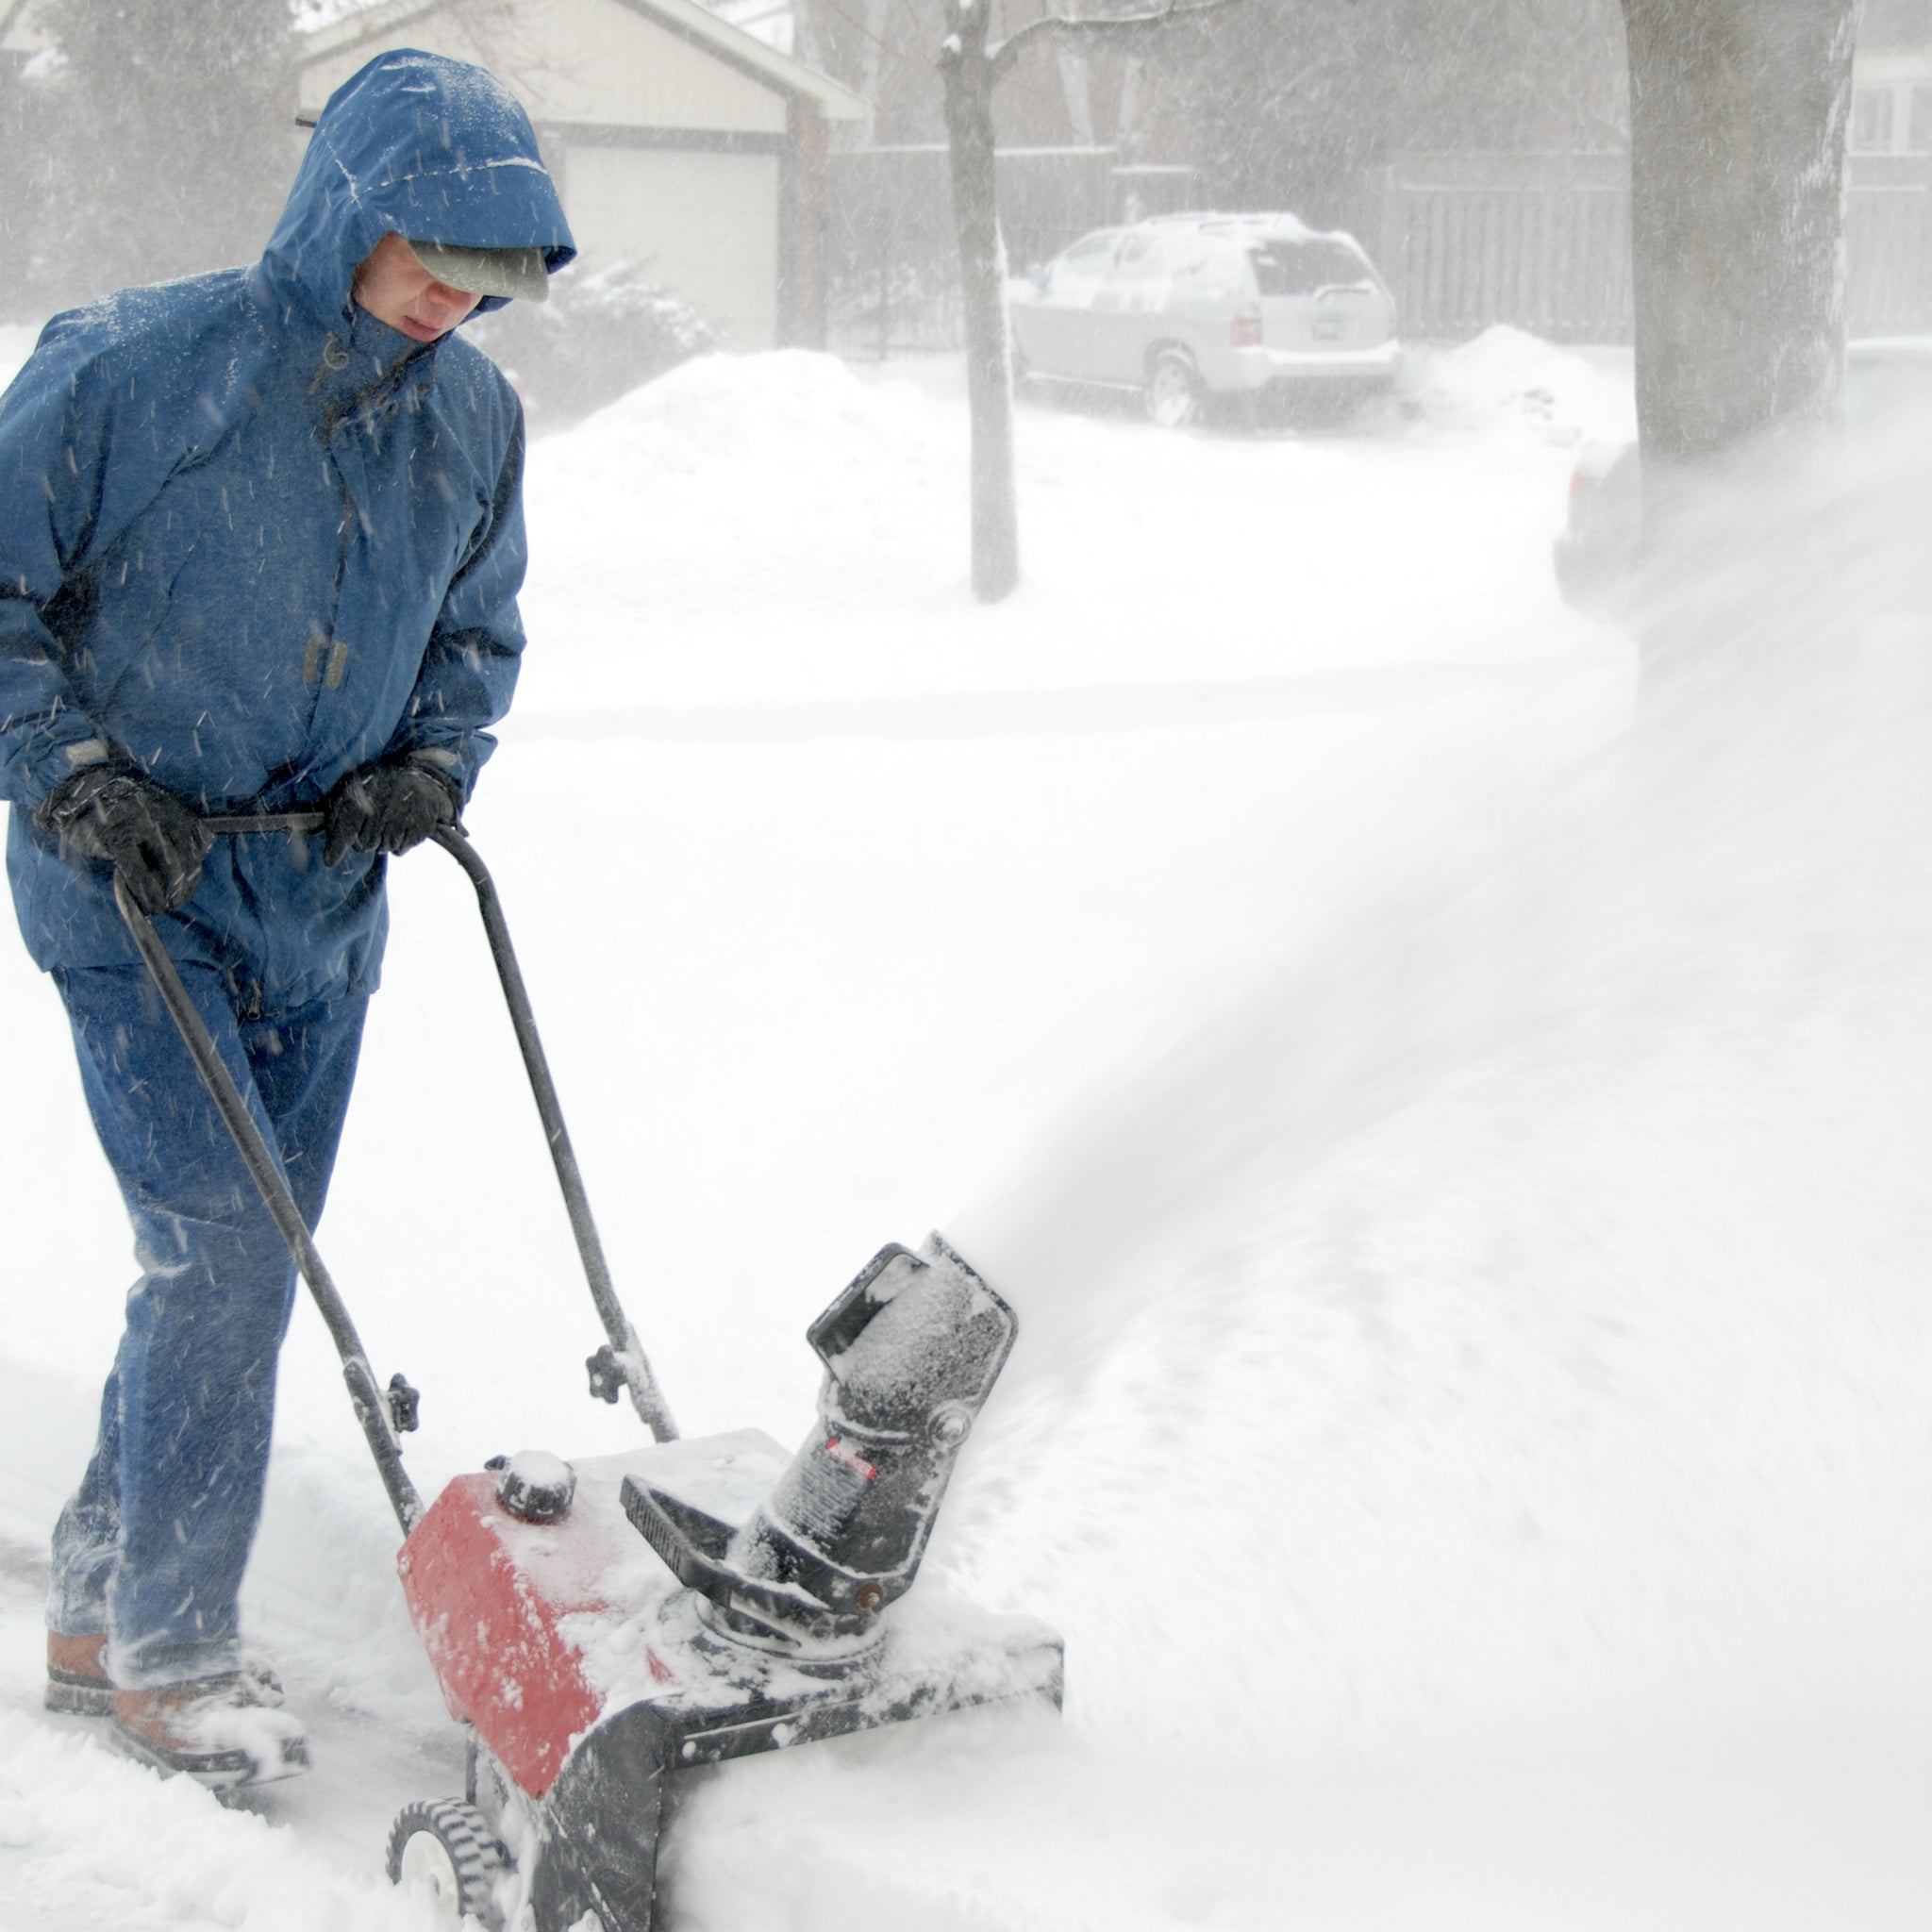 Snow Removal Made Simple: Fast and Safe Techniques for Clear Pathways